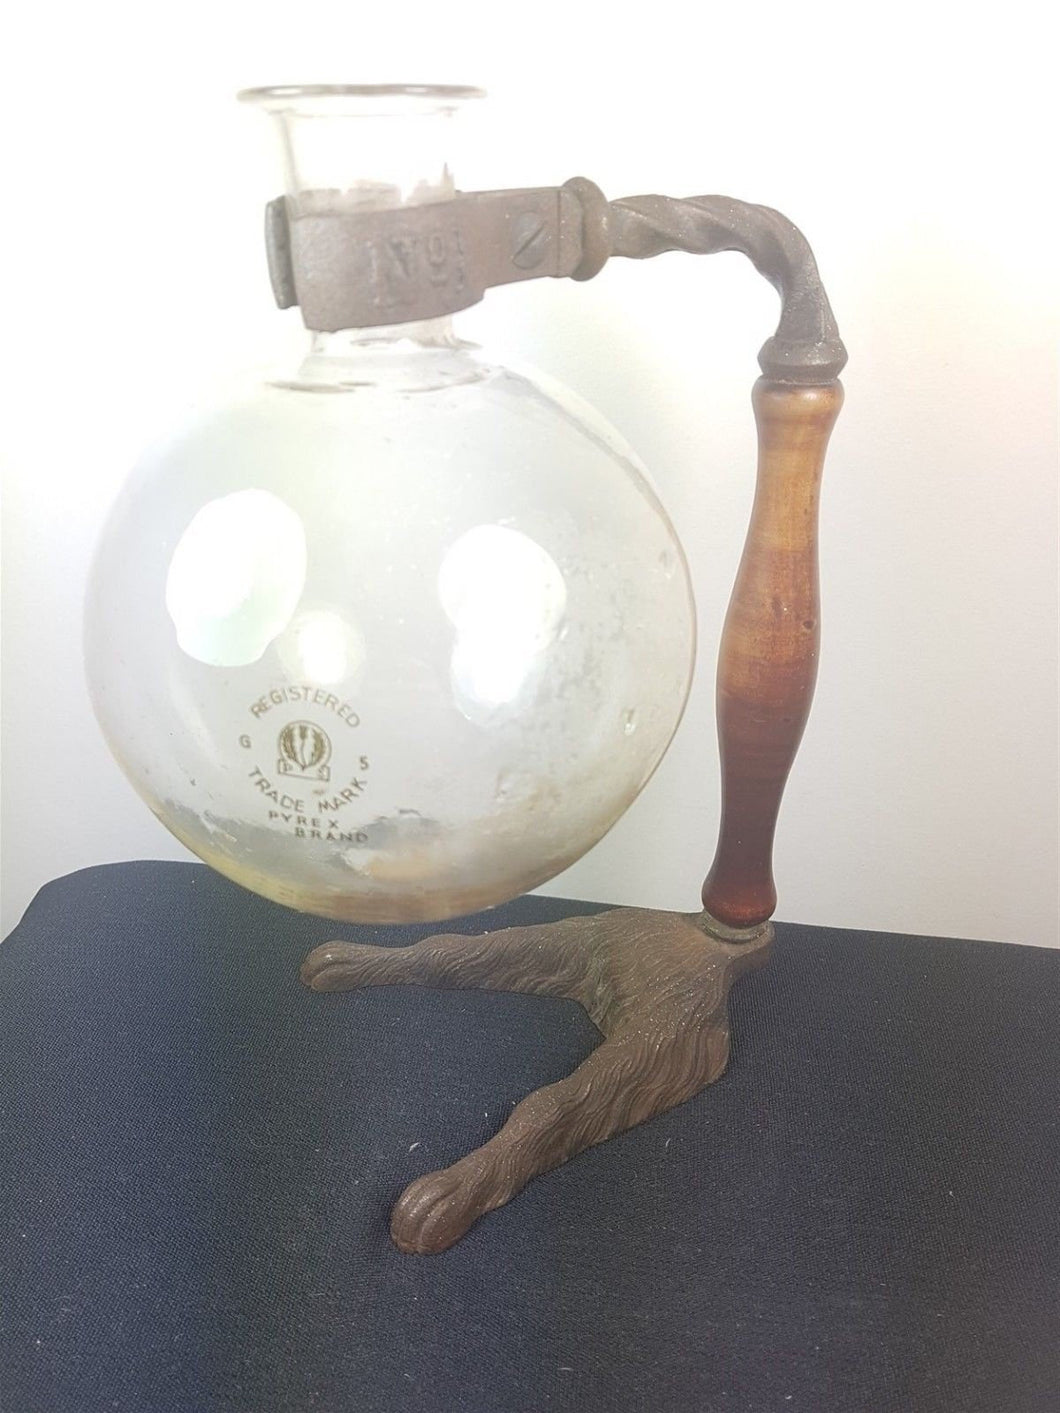 Antique Laboratory Flask Bottle with Wood Handle and Cast Iron Claw Feet Stand Scientific 1800's Original Rare Unusual Oddity